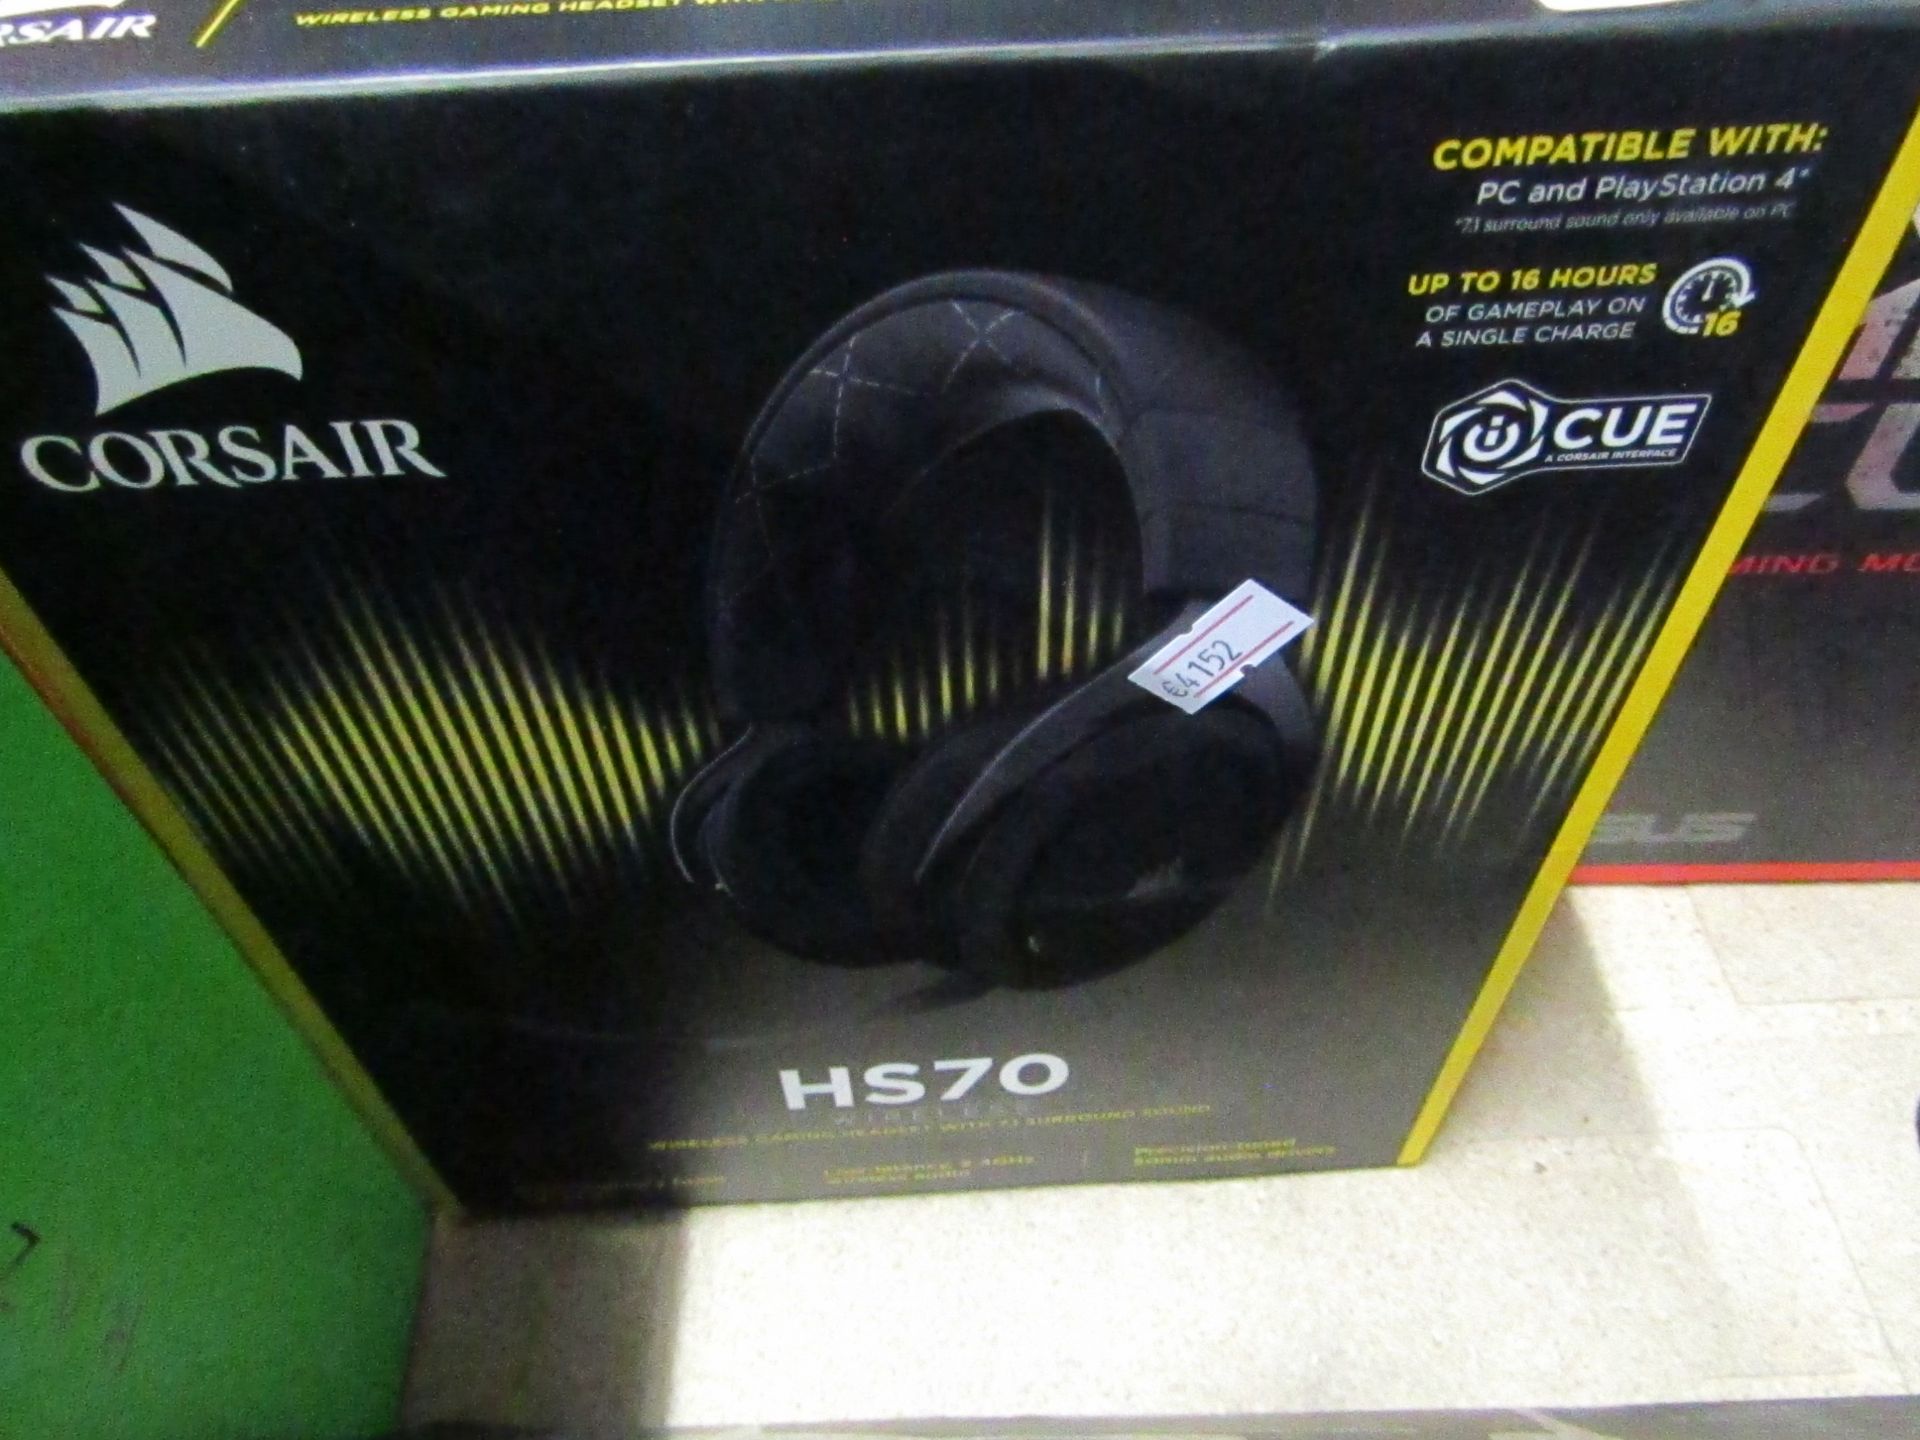 Corsair HS70 wireless 7.1 gaming headset, untested and boxed.